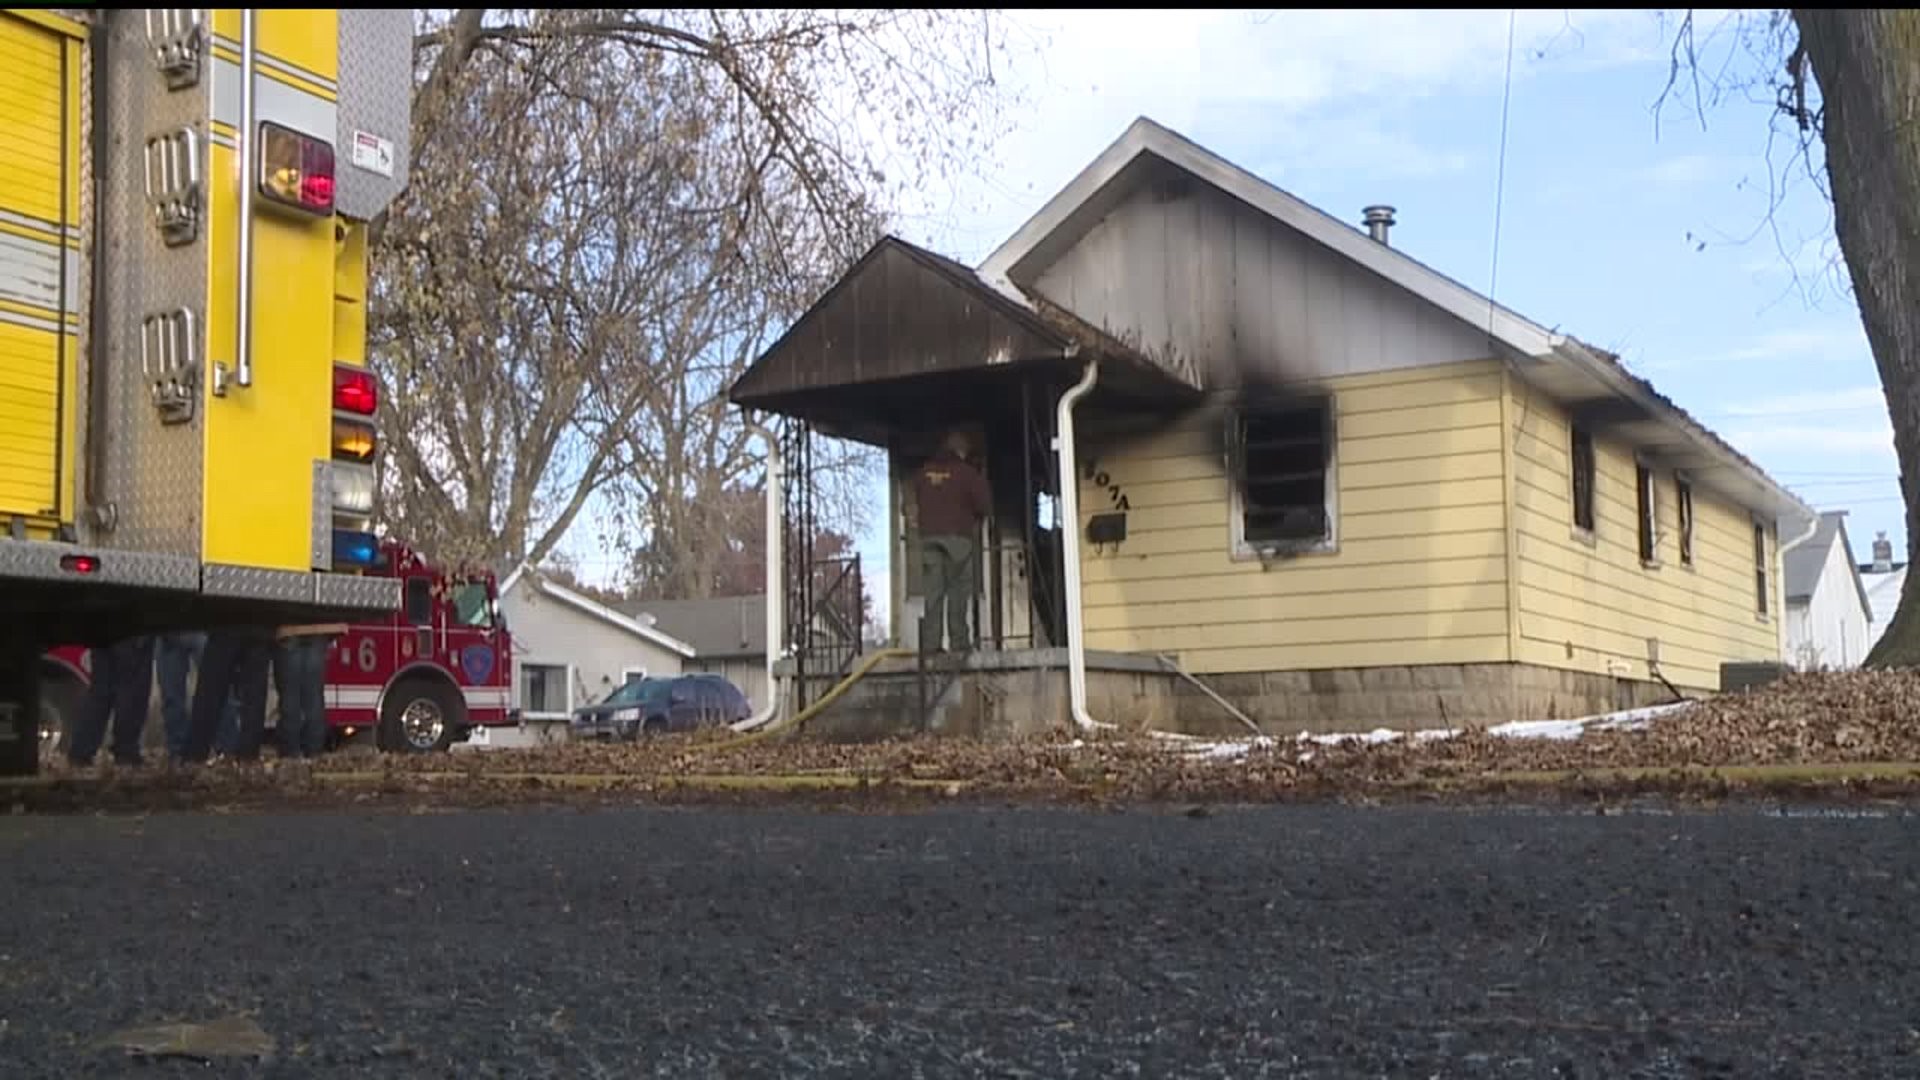 Rock Falls house fire breaks out Saturday afternoon, confirmed fatality